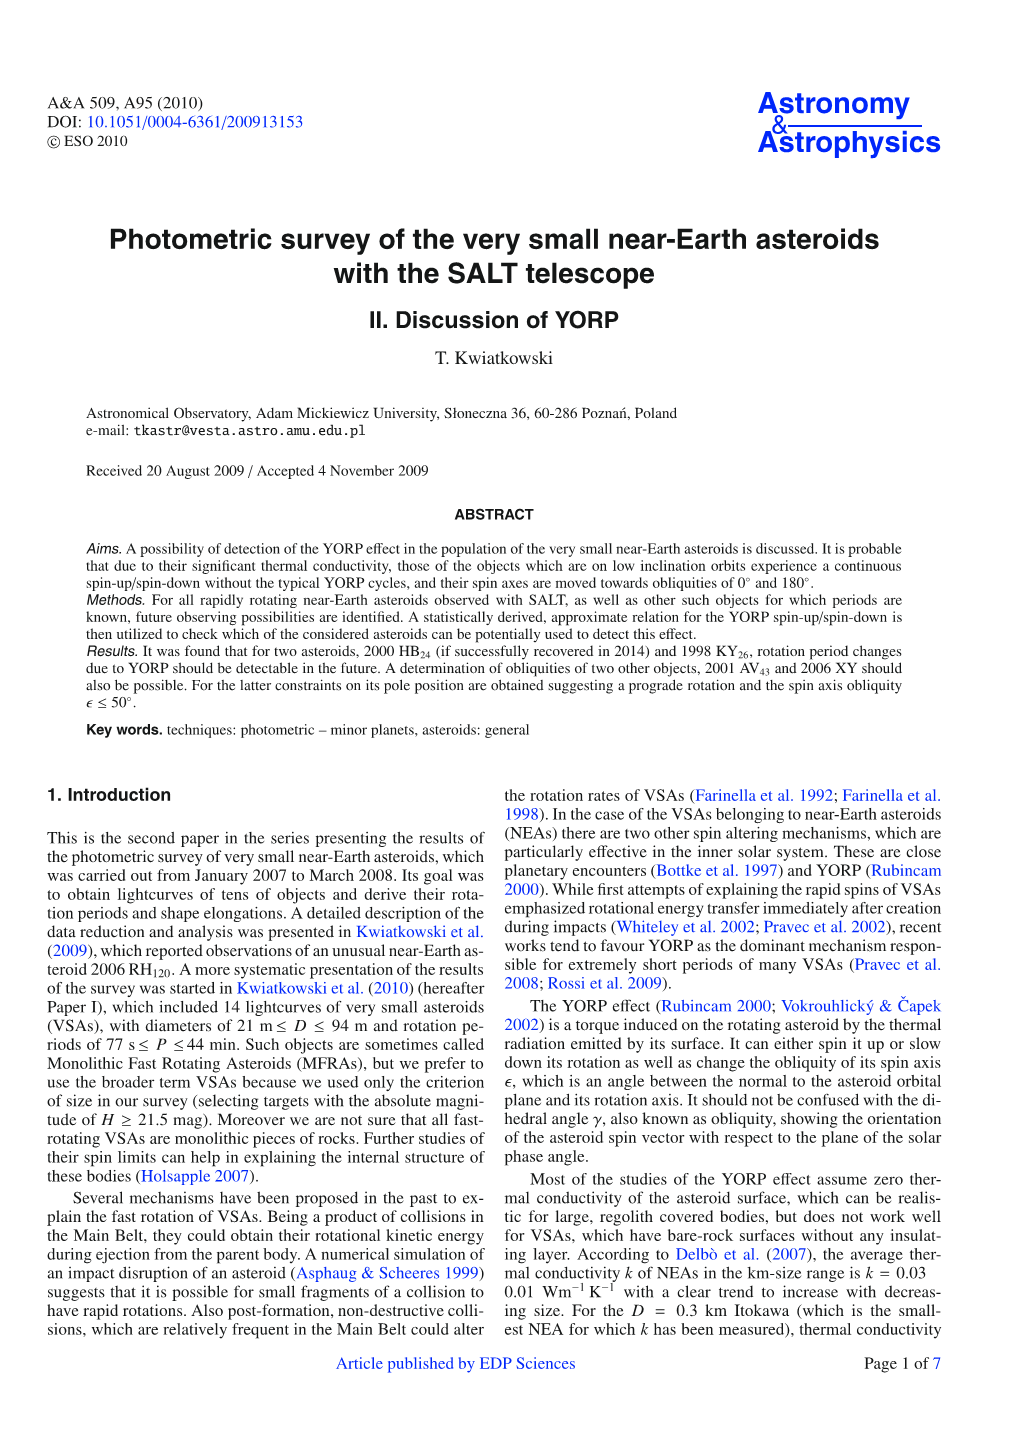 Photometric Survey of the Very Small Near-Earth Asteroids with the SALT Telescope II